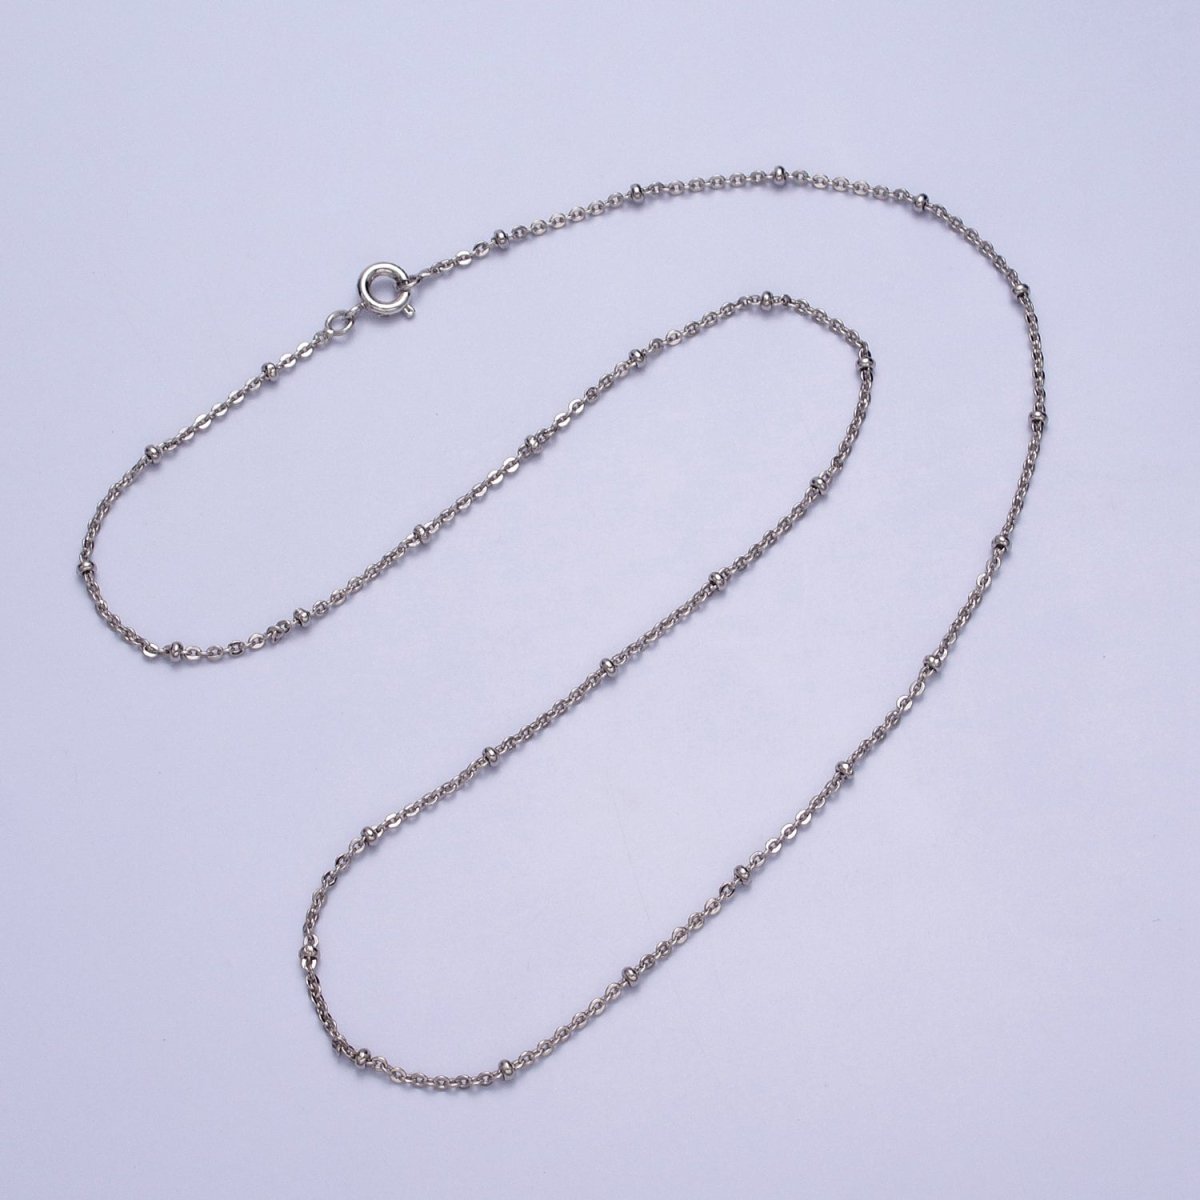 1mm Beaded Satellite Chain Silver Satellite Necklace Dainty Simple Everyday 16.5 Inch Layering Necklace for Minimalist Jewelry | WA-1594 Clearance Pricing - DLUXCA